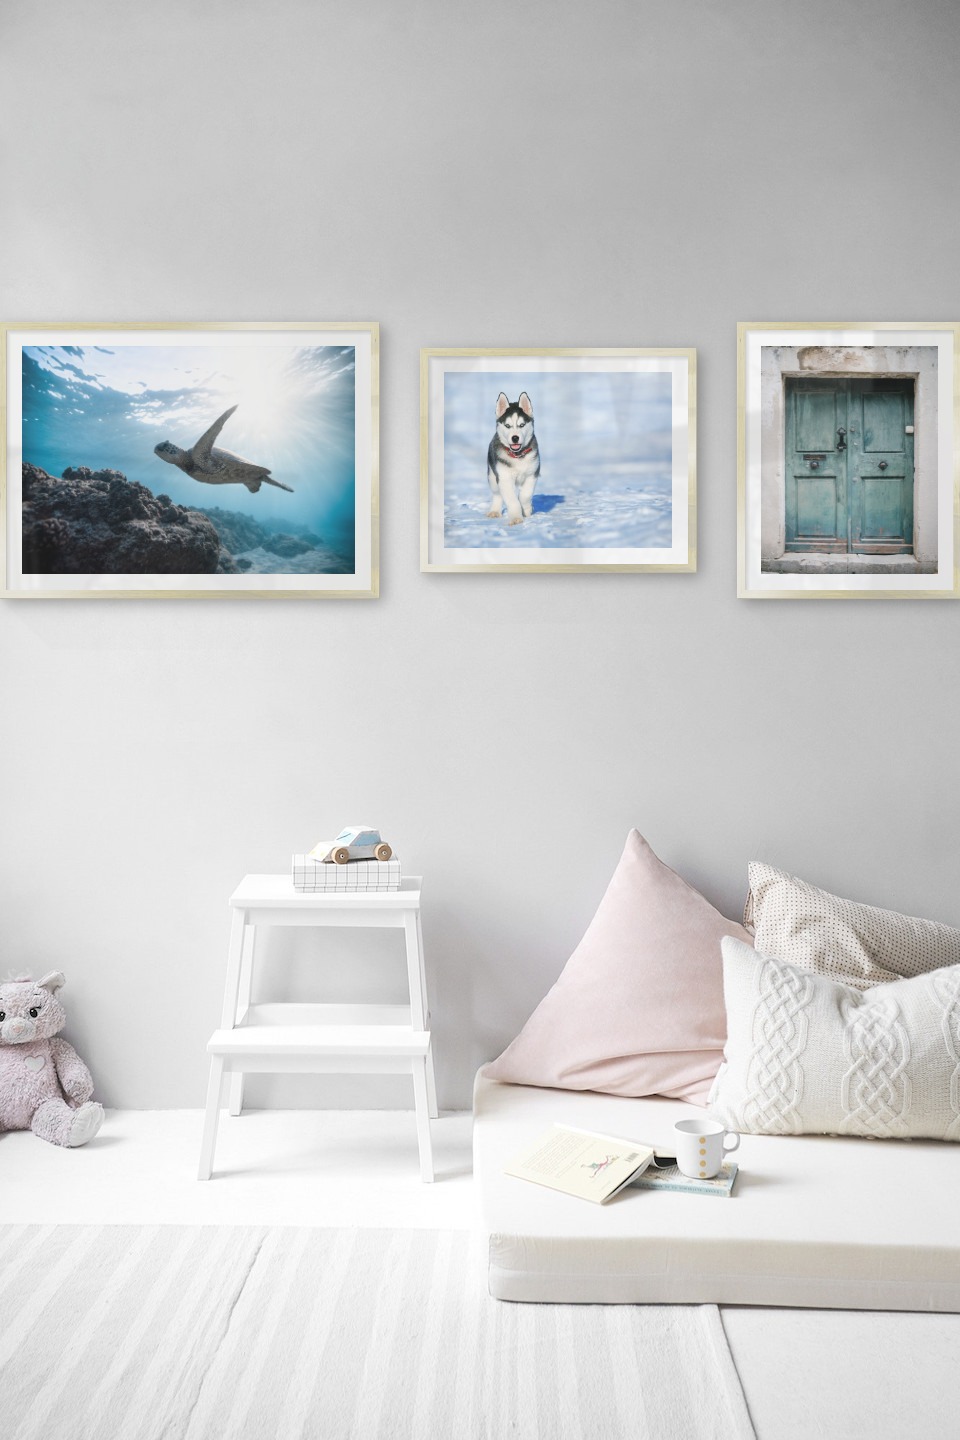 Gallery wall with picture frames in gold in sizes 50x70 and 40x50 with prints "Turtle in the water", "Husky" and "Door"